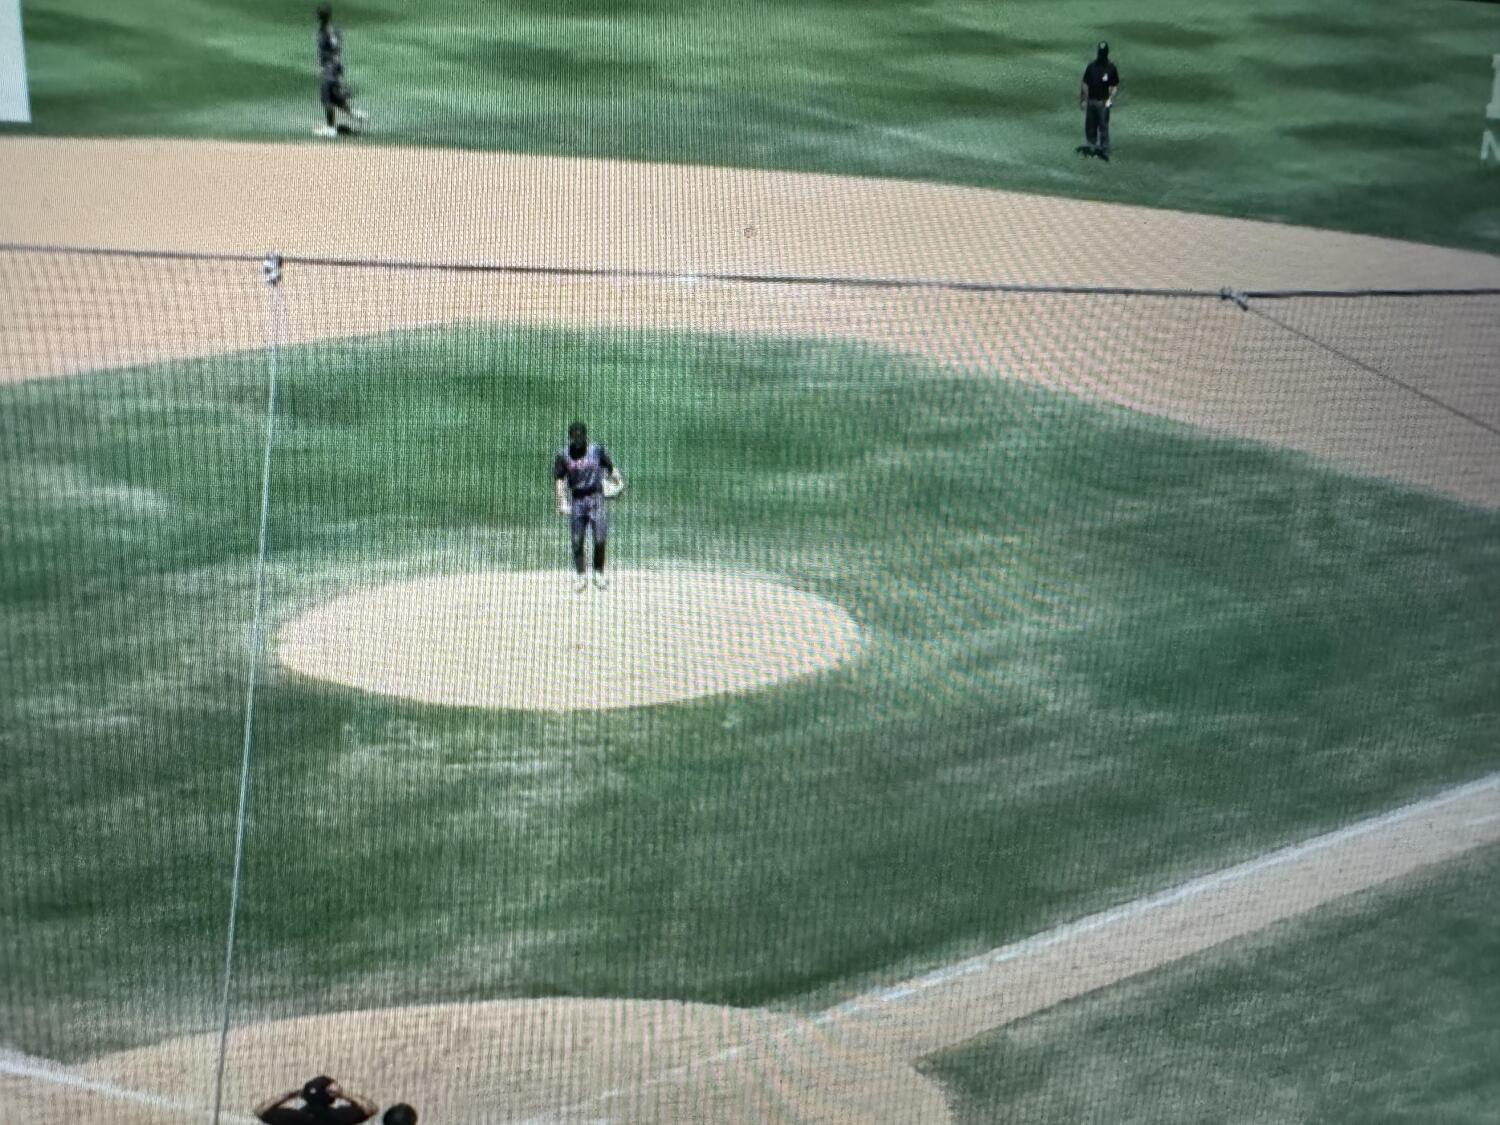 Complaints about field conditions at Lake Elsinore surface for championship baseball games